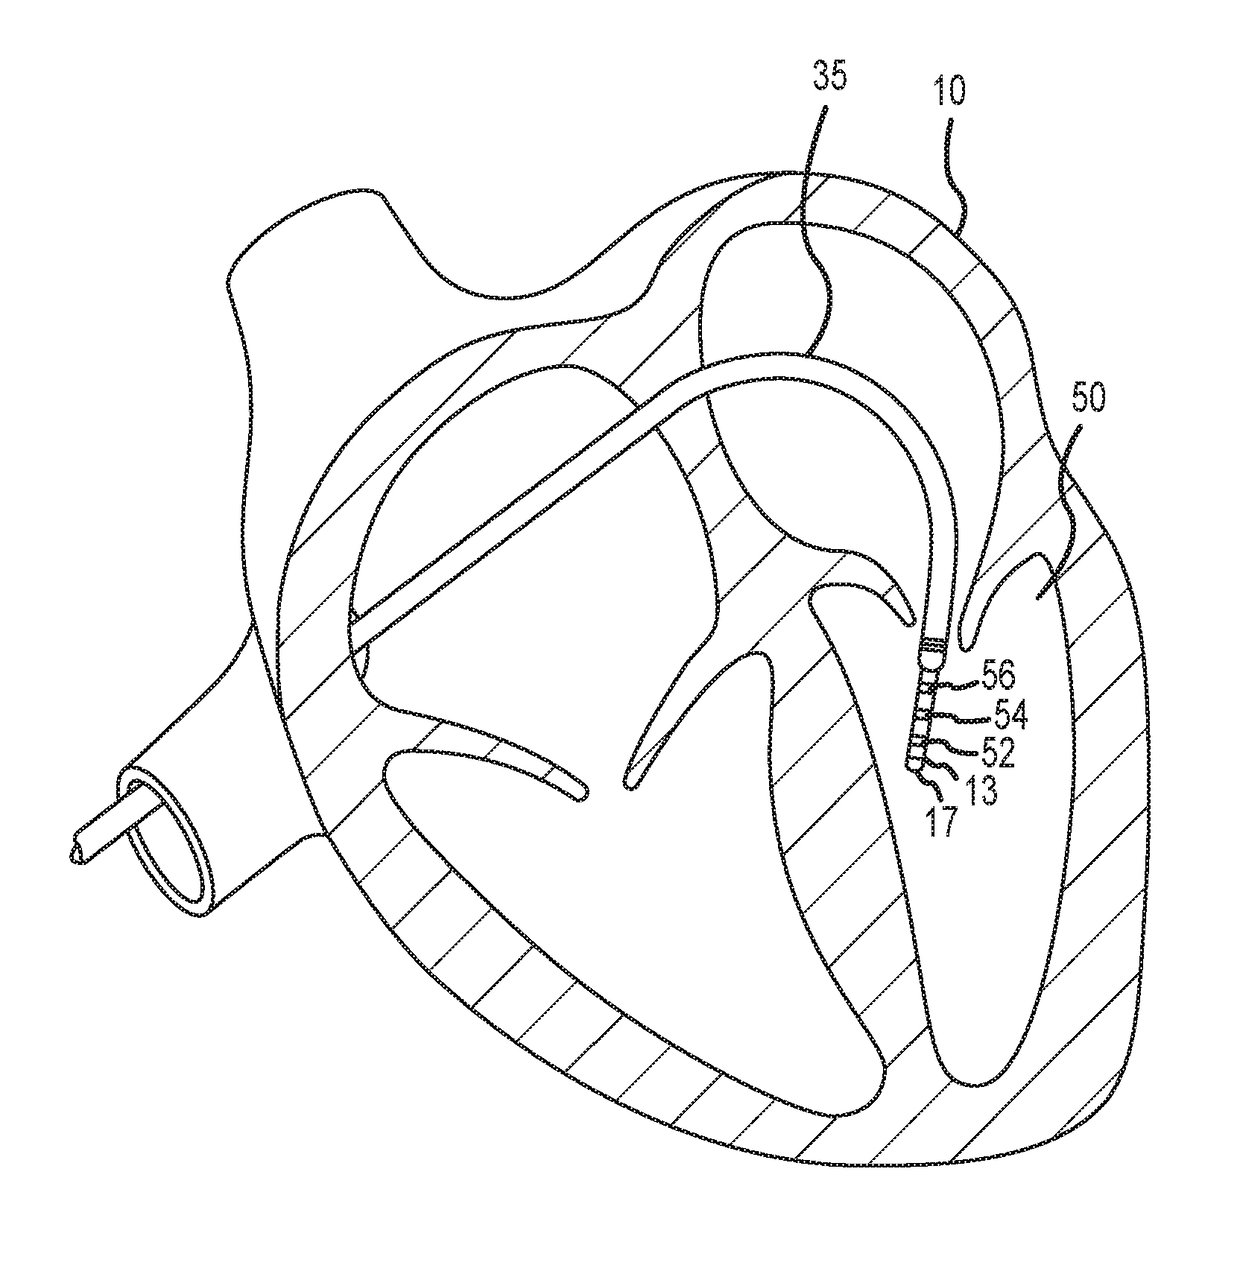 Methods and Systems for Statistically Analyzing Electrograms for Local Abnormal Ventricular Activities and Mapping the Same